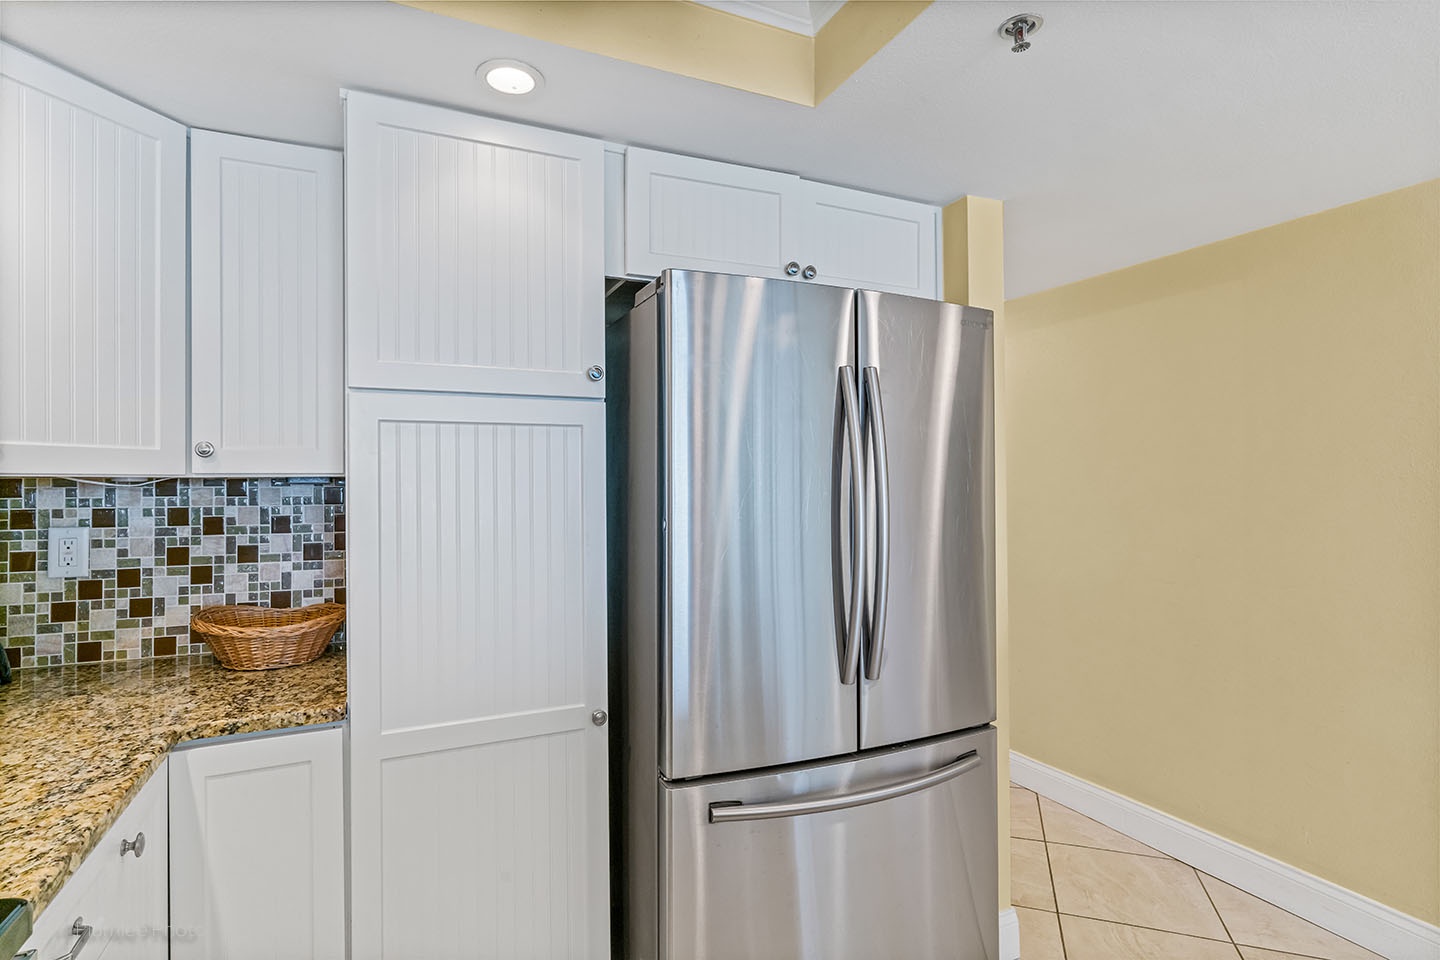 Large stainless refrigerator